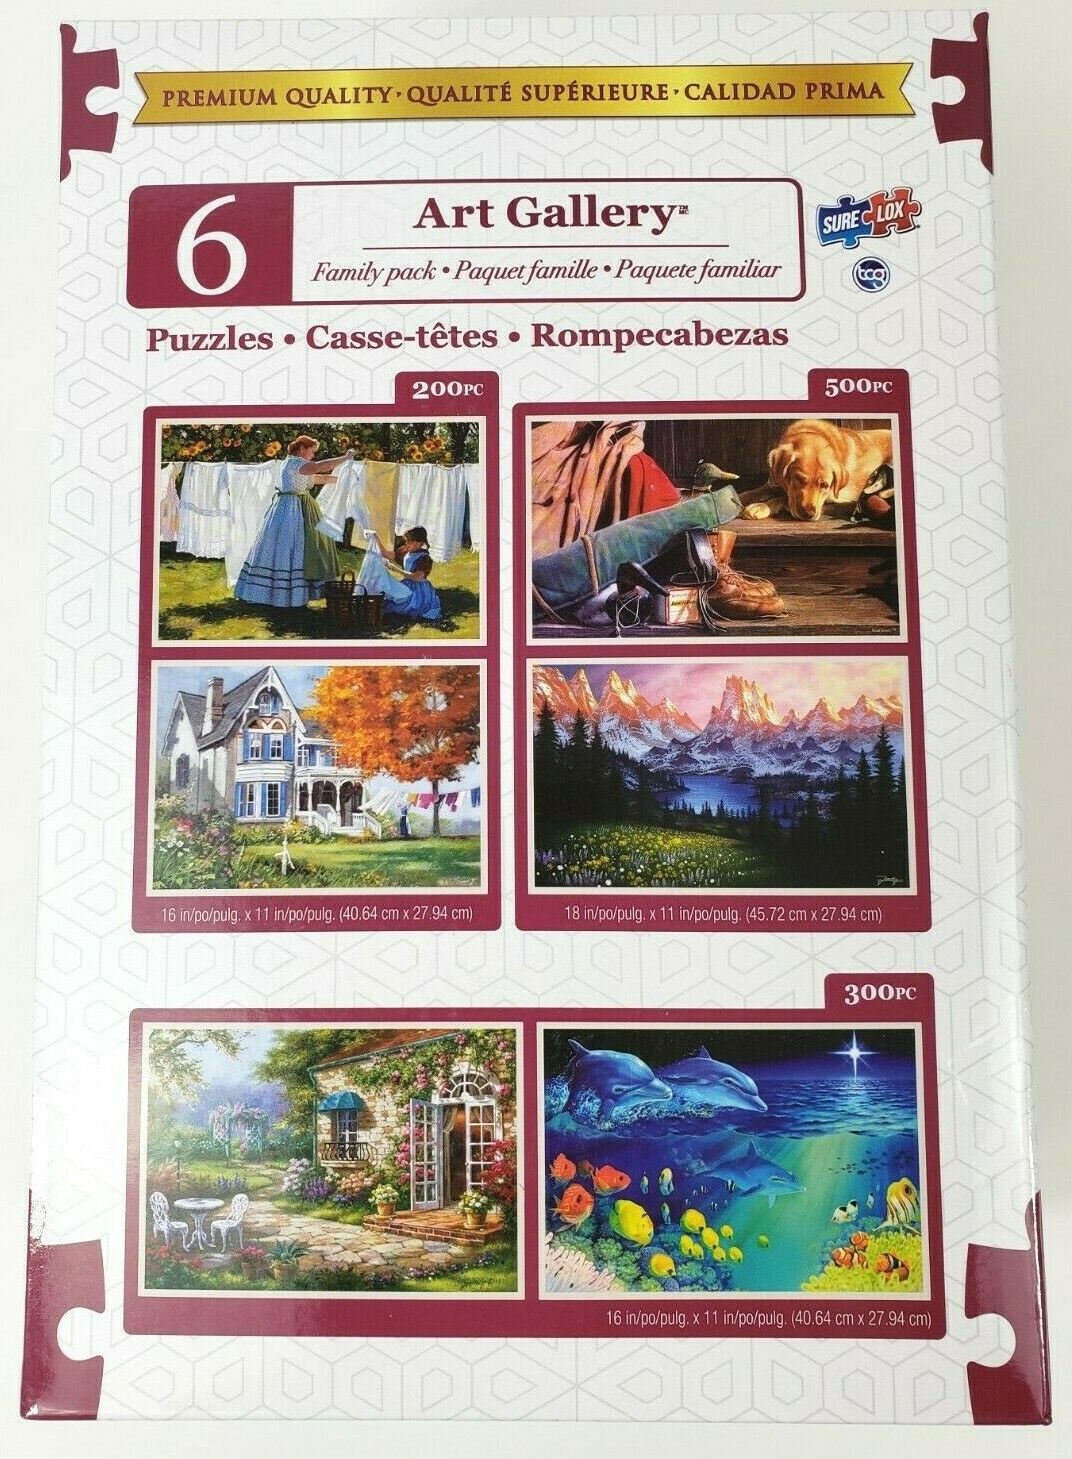 New Art Gallery 6 Jigsaw Puzzle Family Variety Pack Sure Lox Premiumquality 5a